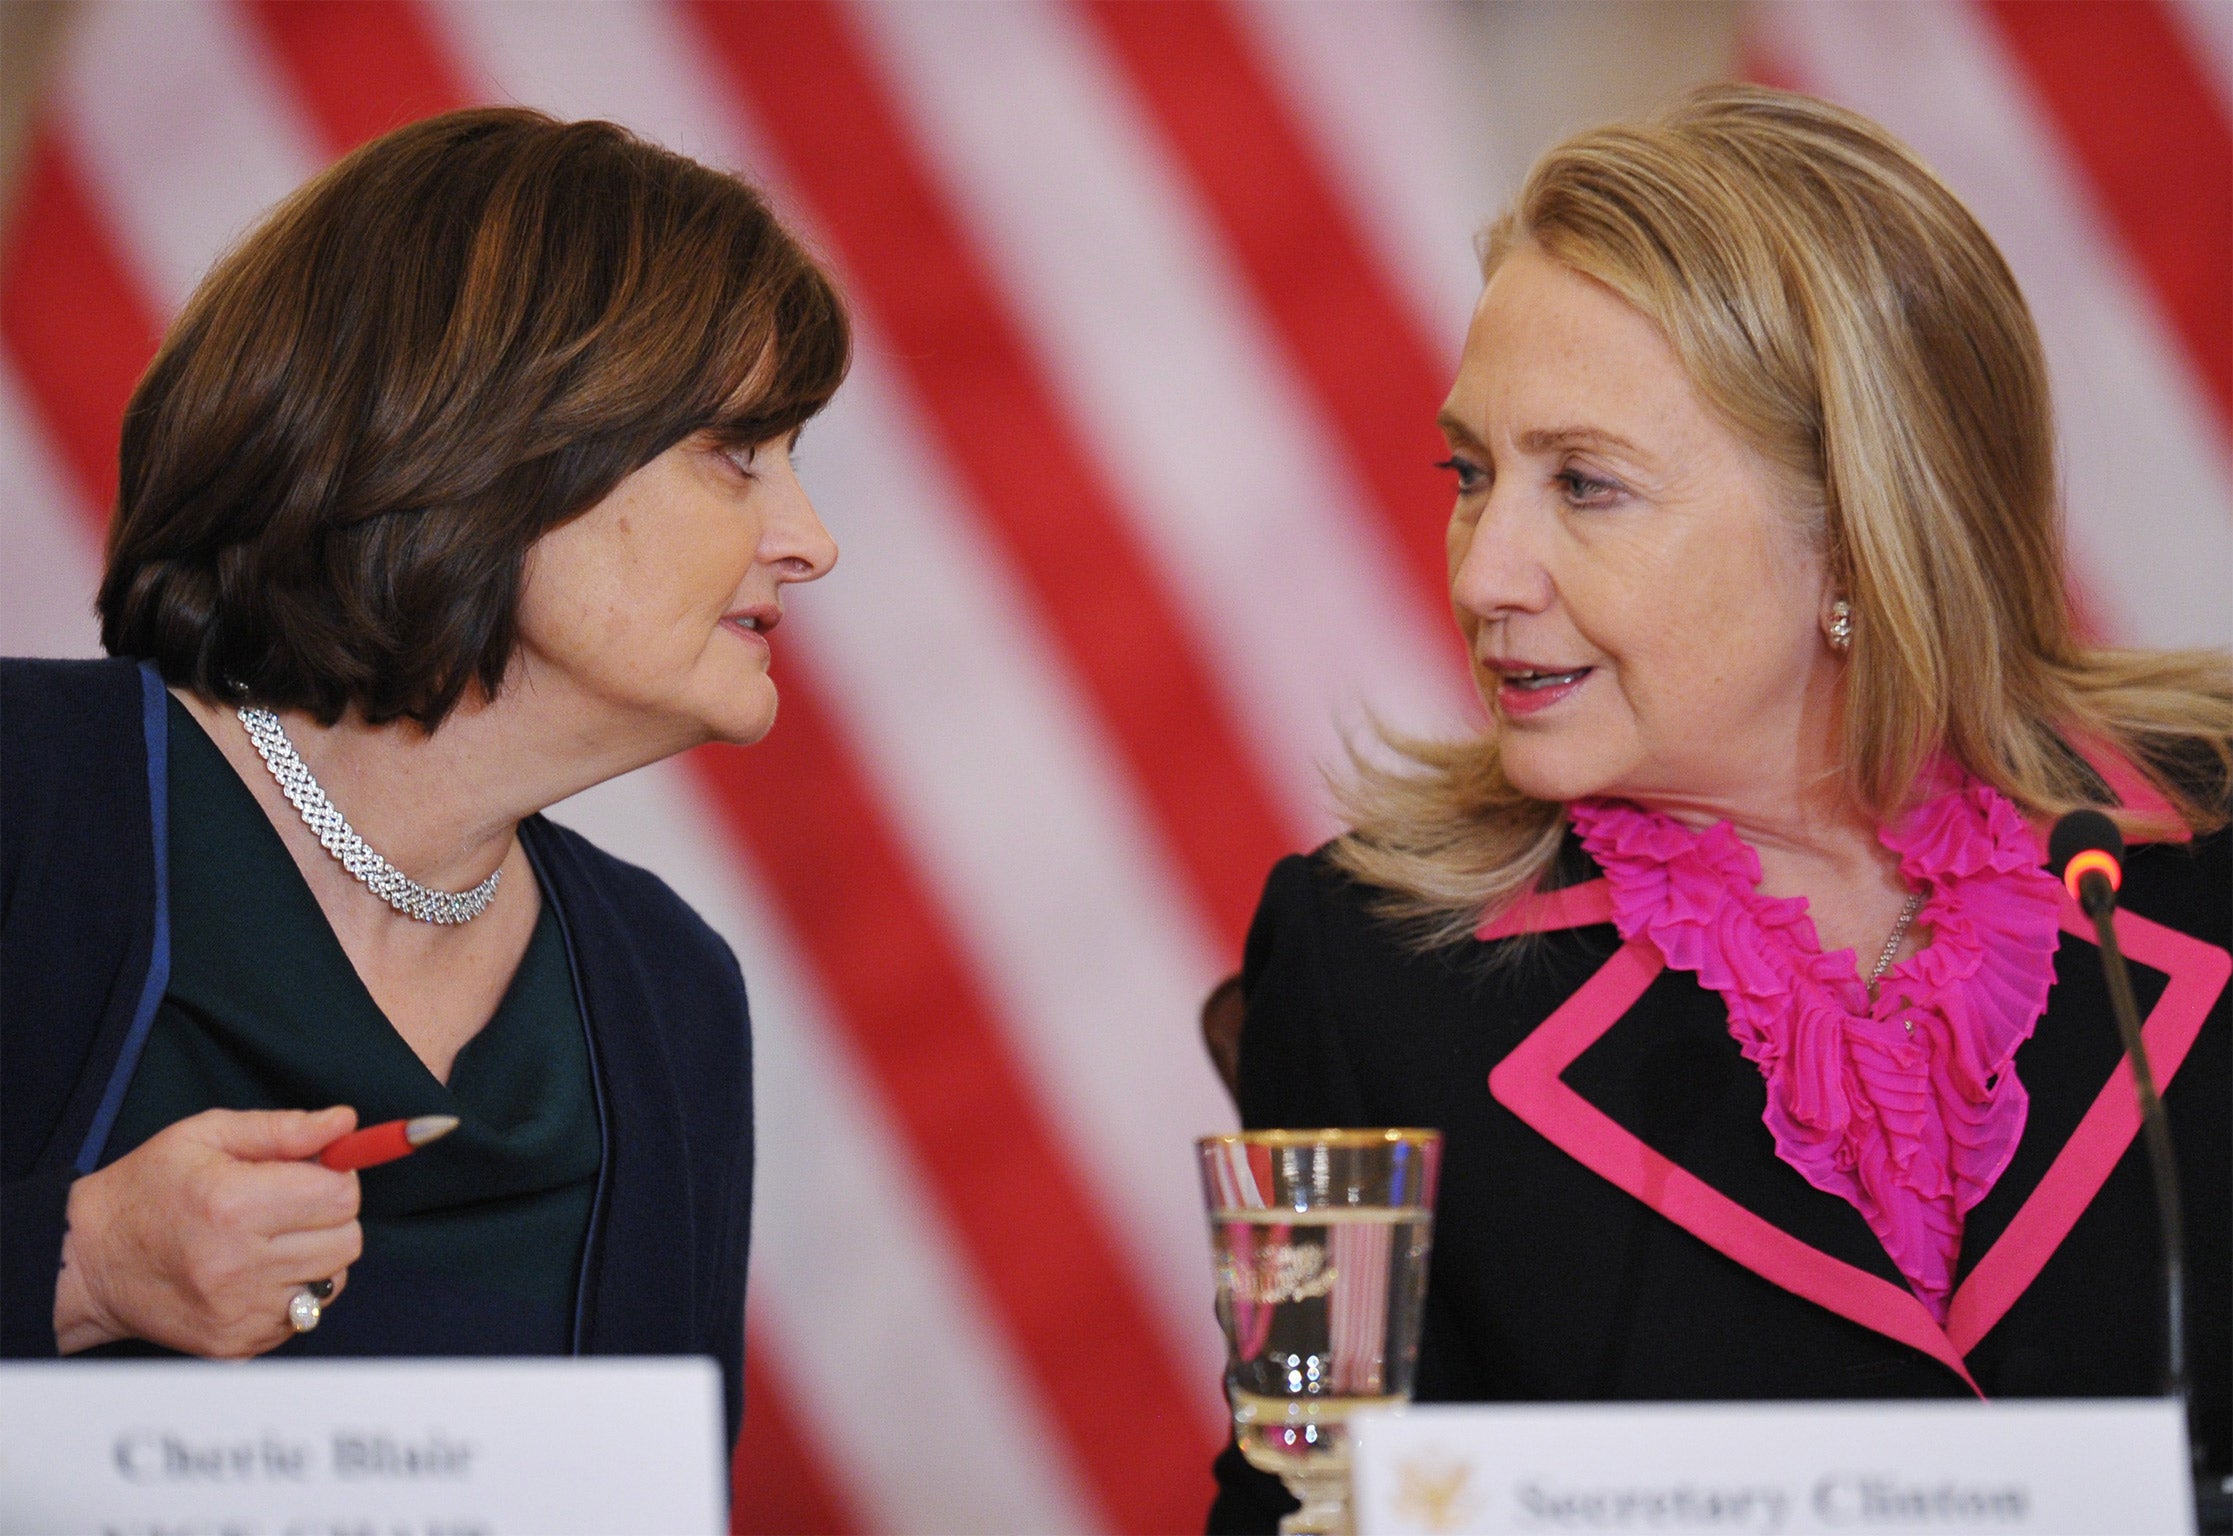 Cherie Blair talks to Hillary Clinton, who was then the US Secretary of State, in Washington in 2012